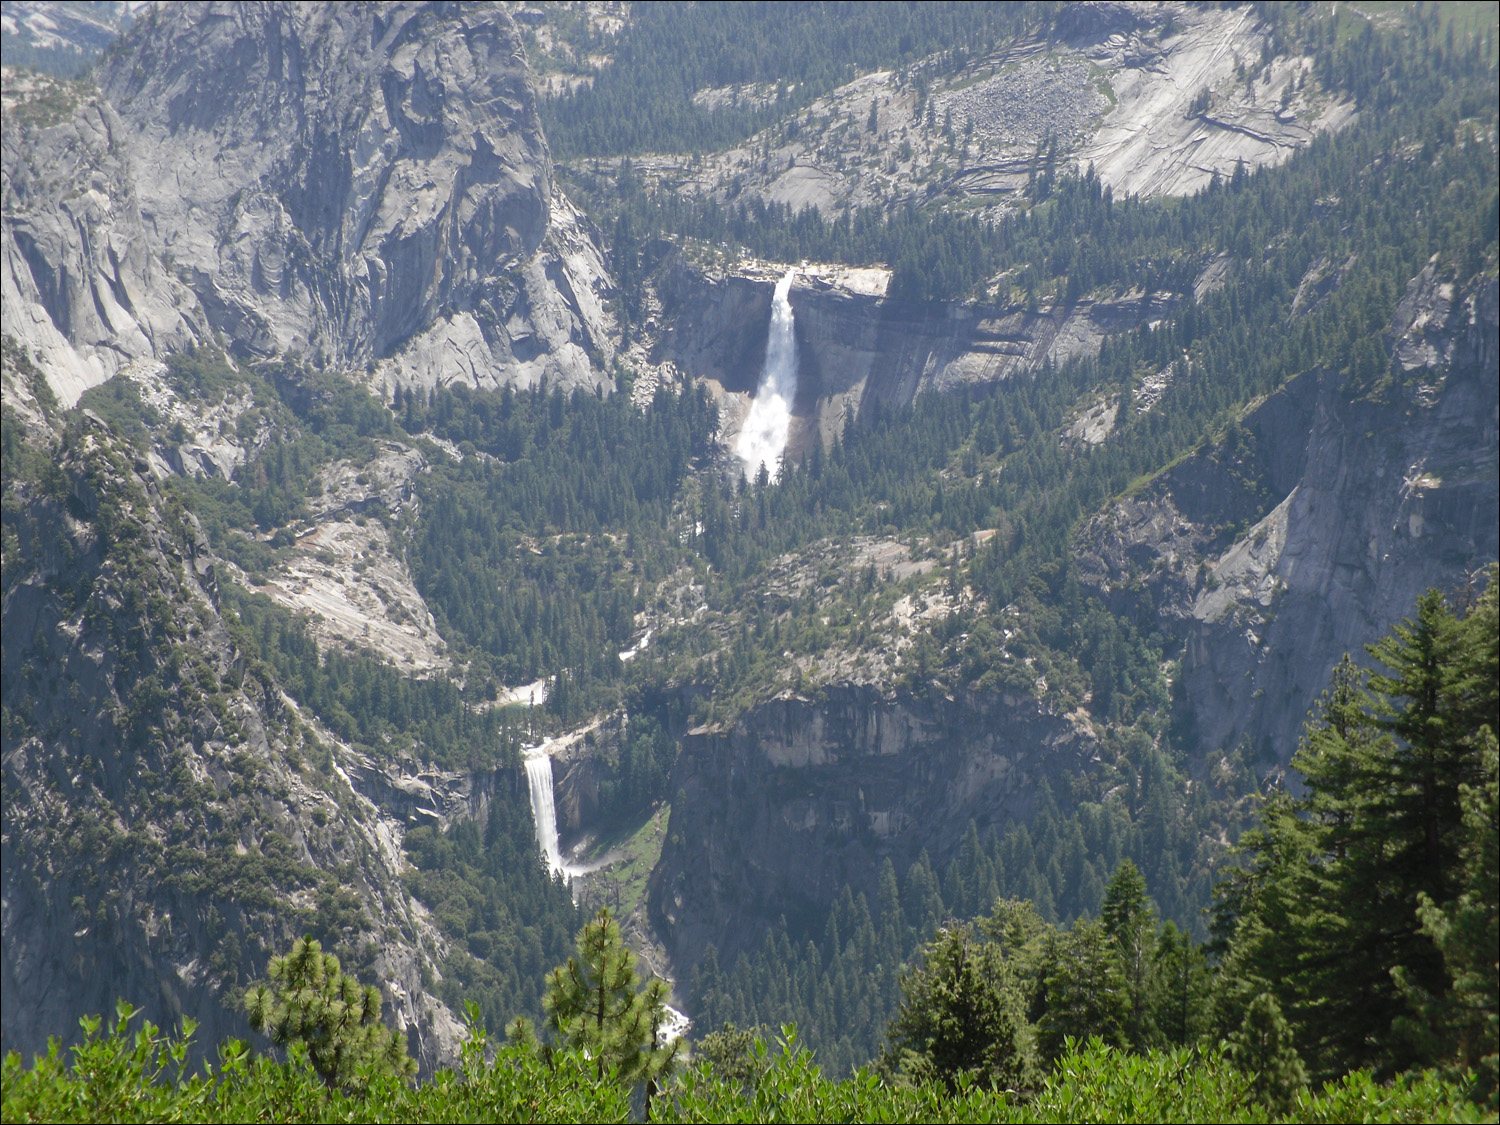 Hike up to Glacier Point-Views of Vernal(L) and Nevada Falls from Glacier Point